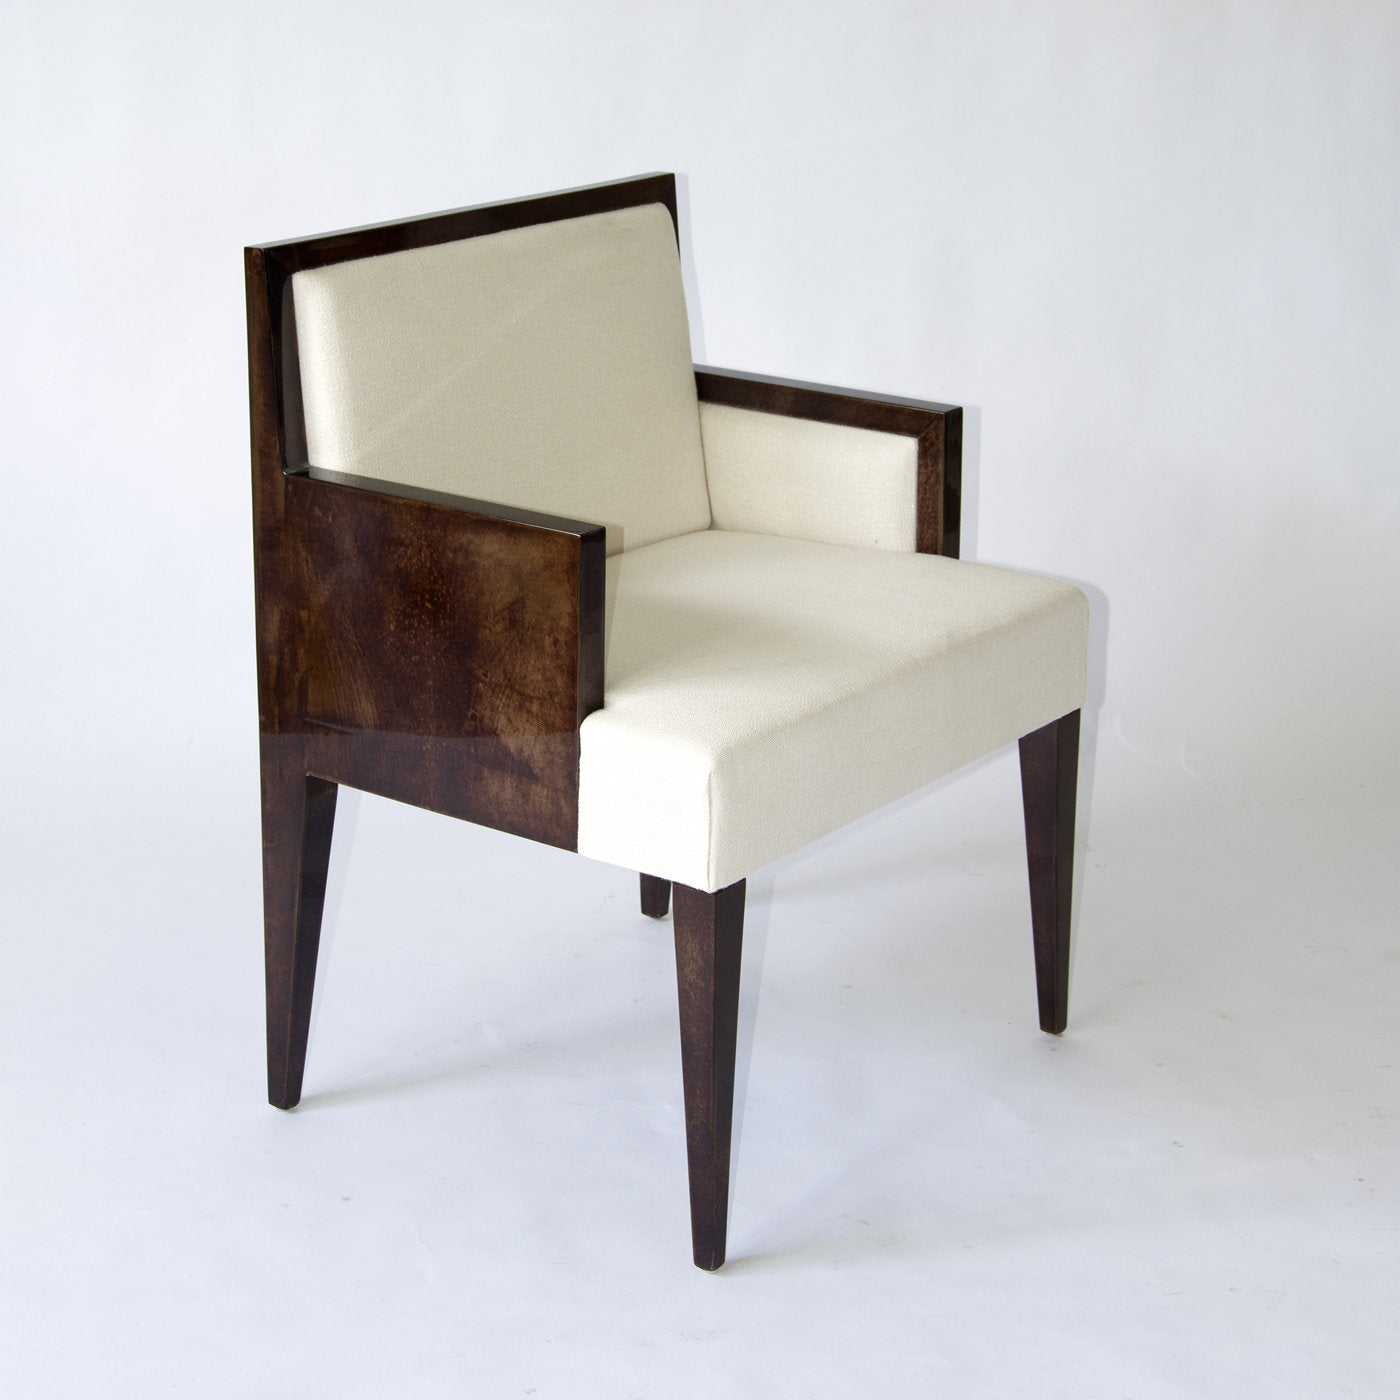 Oyster Chair with Armrests - Alternative view 1